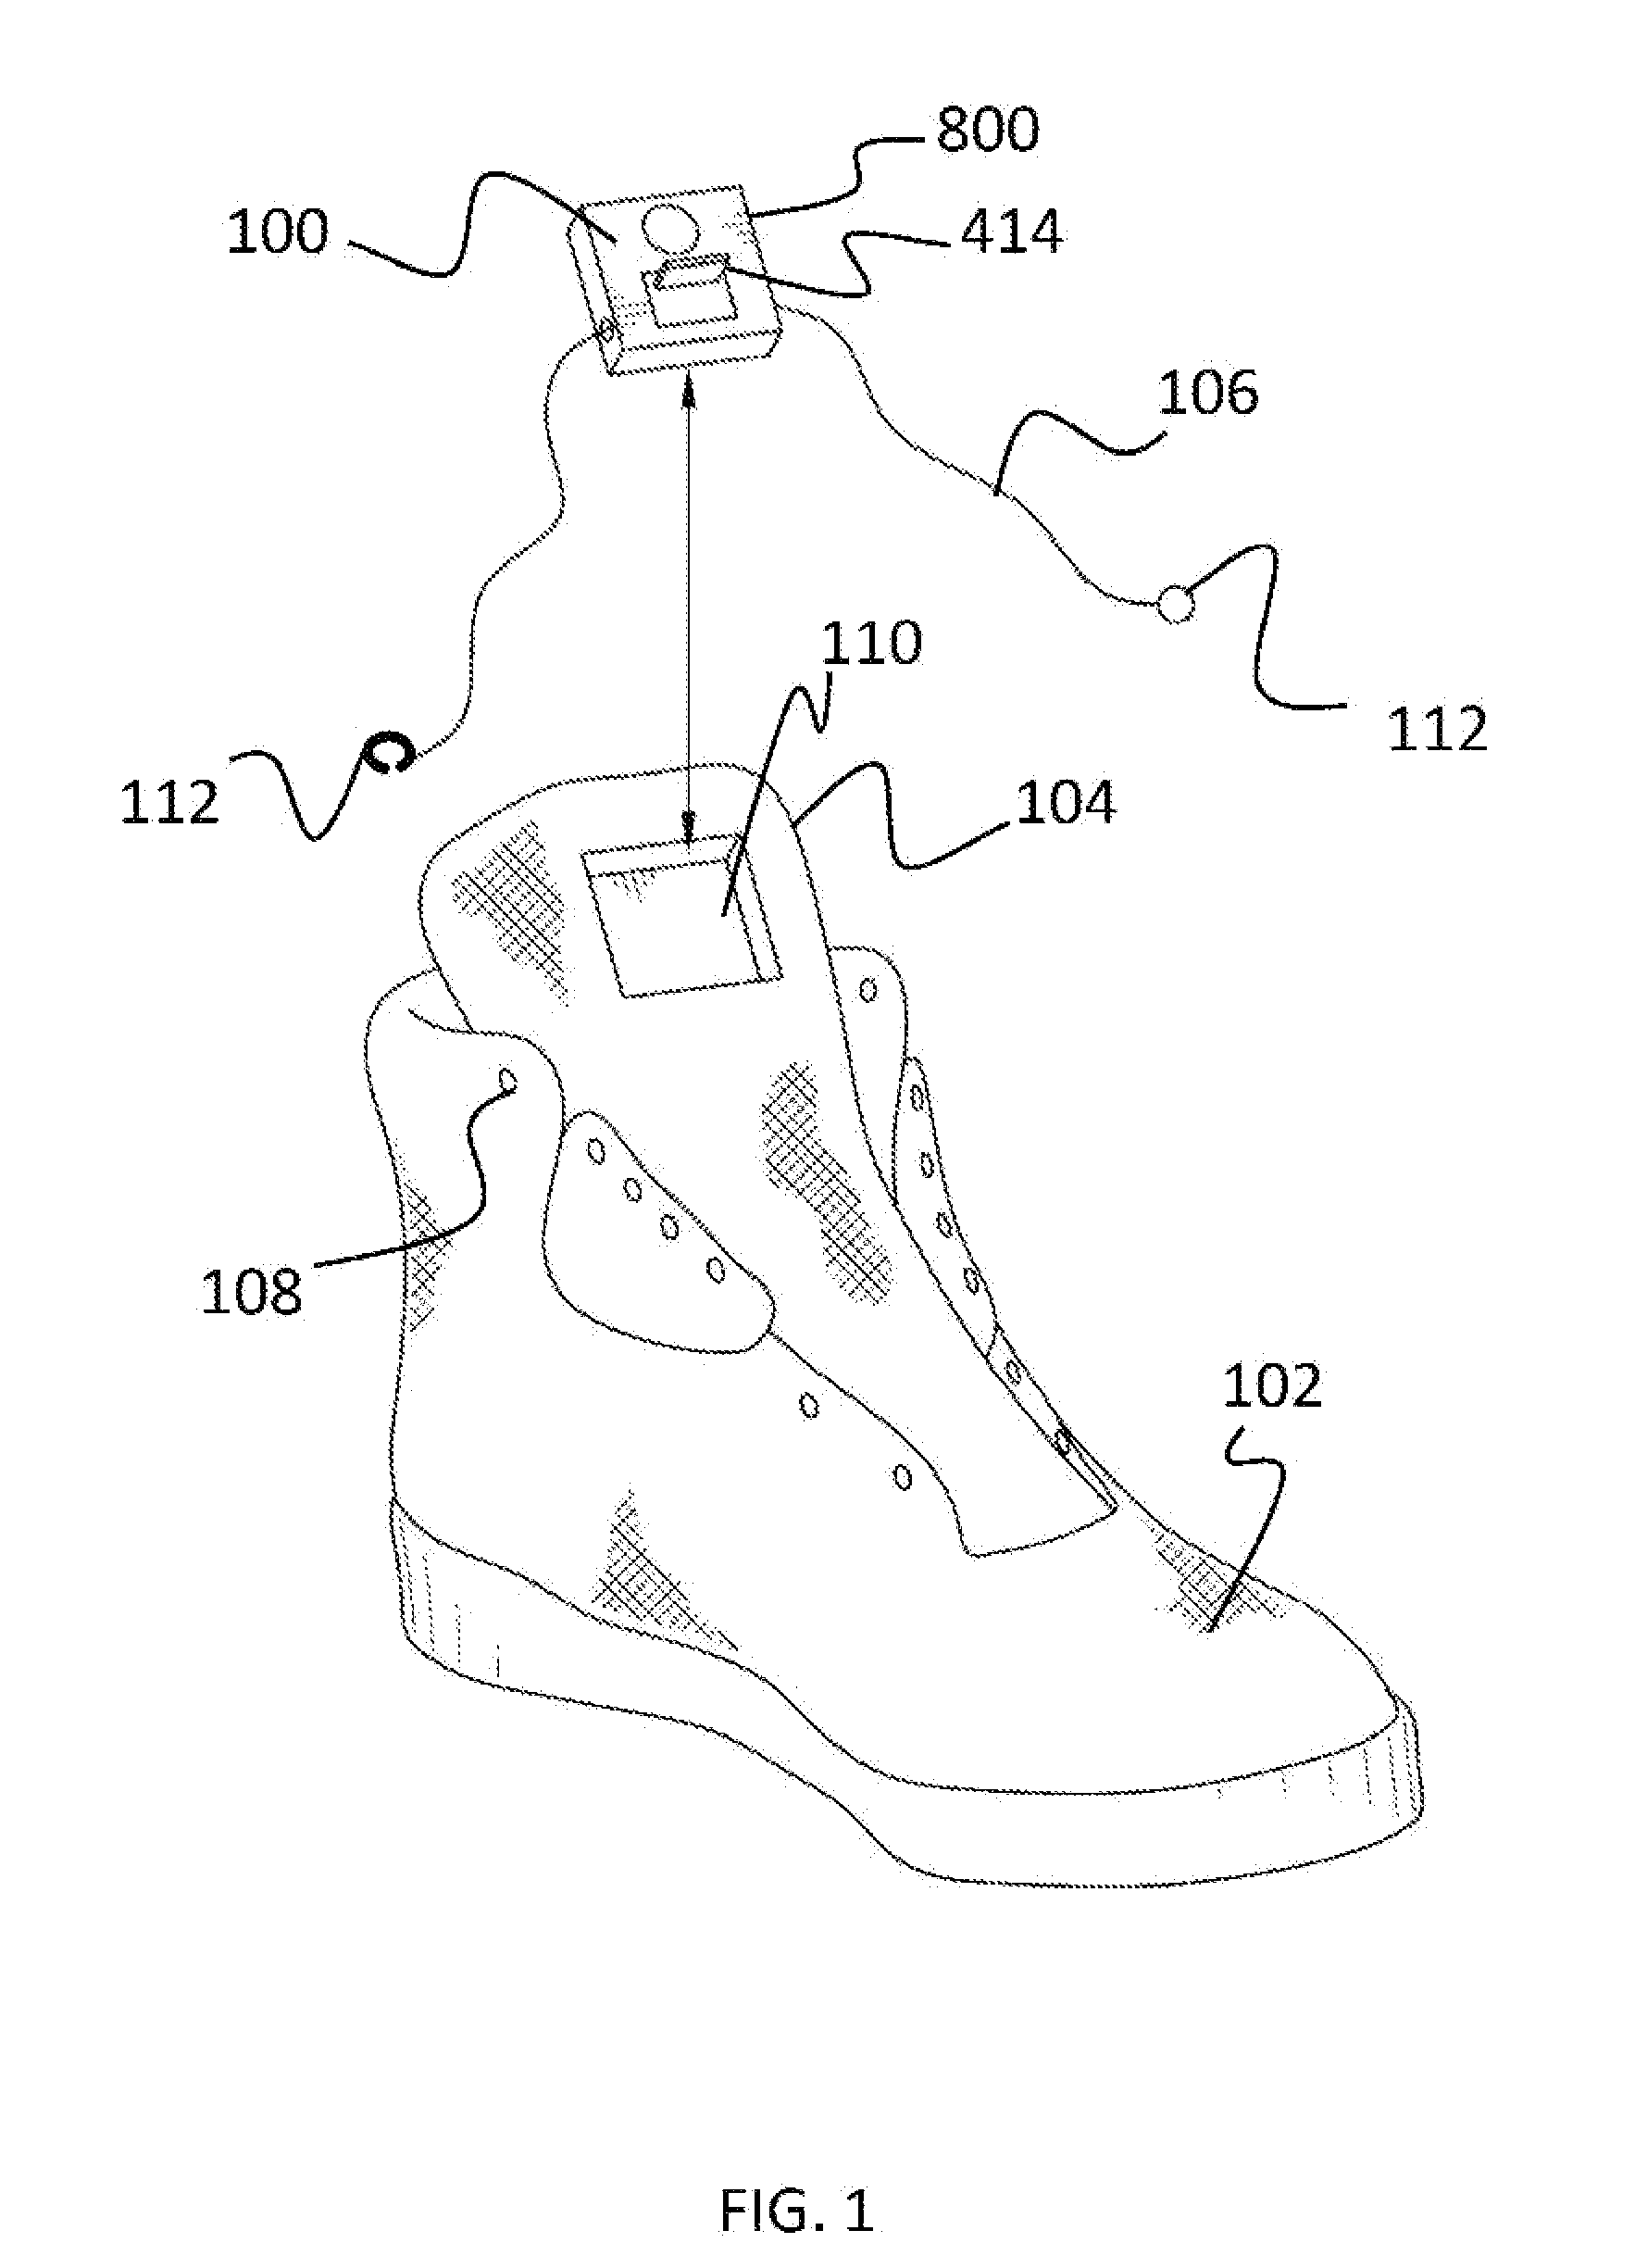 Device for automatically tightening and loosening laces